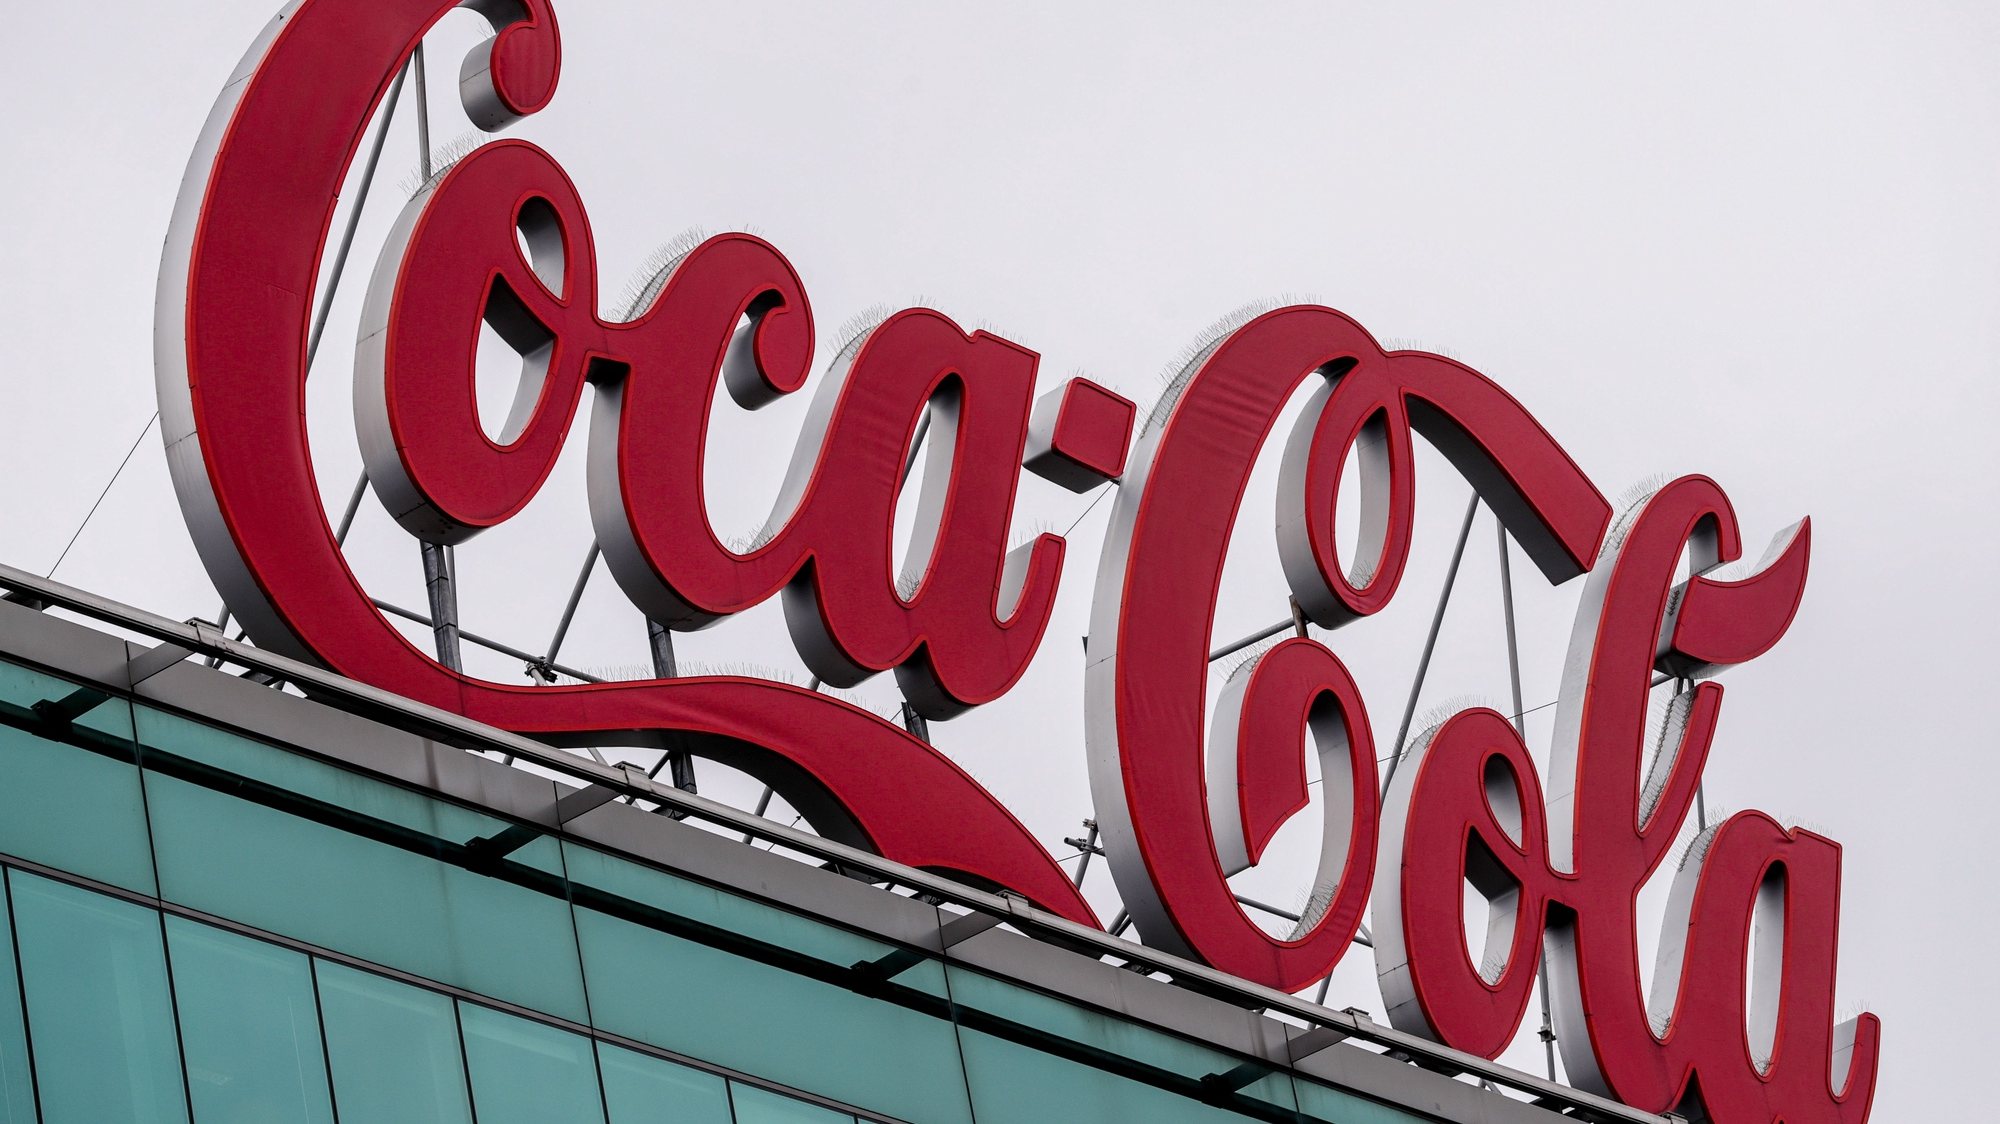 epa08998895 (FILE) - A view of a Coca-Cola logo at the headquarter of Coca-Cola Belgium in Brussels, Belgium, 08 September 2020 (reissued 09 February 2021). The Coca-Cola company is due to pulish their 4th quarter 2020 results on 10 February 2021.  EPA/STEPHANIE LECOCQ *** Local Caption *** 56327284